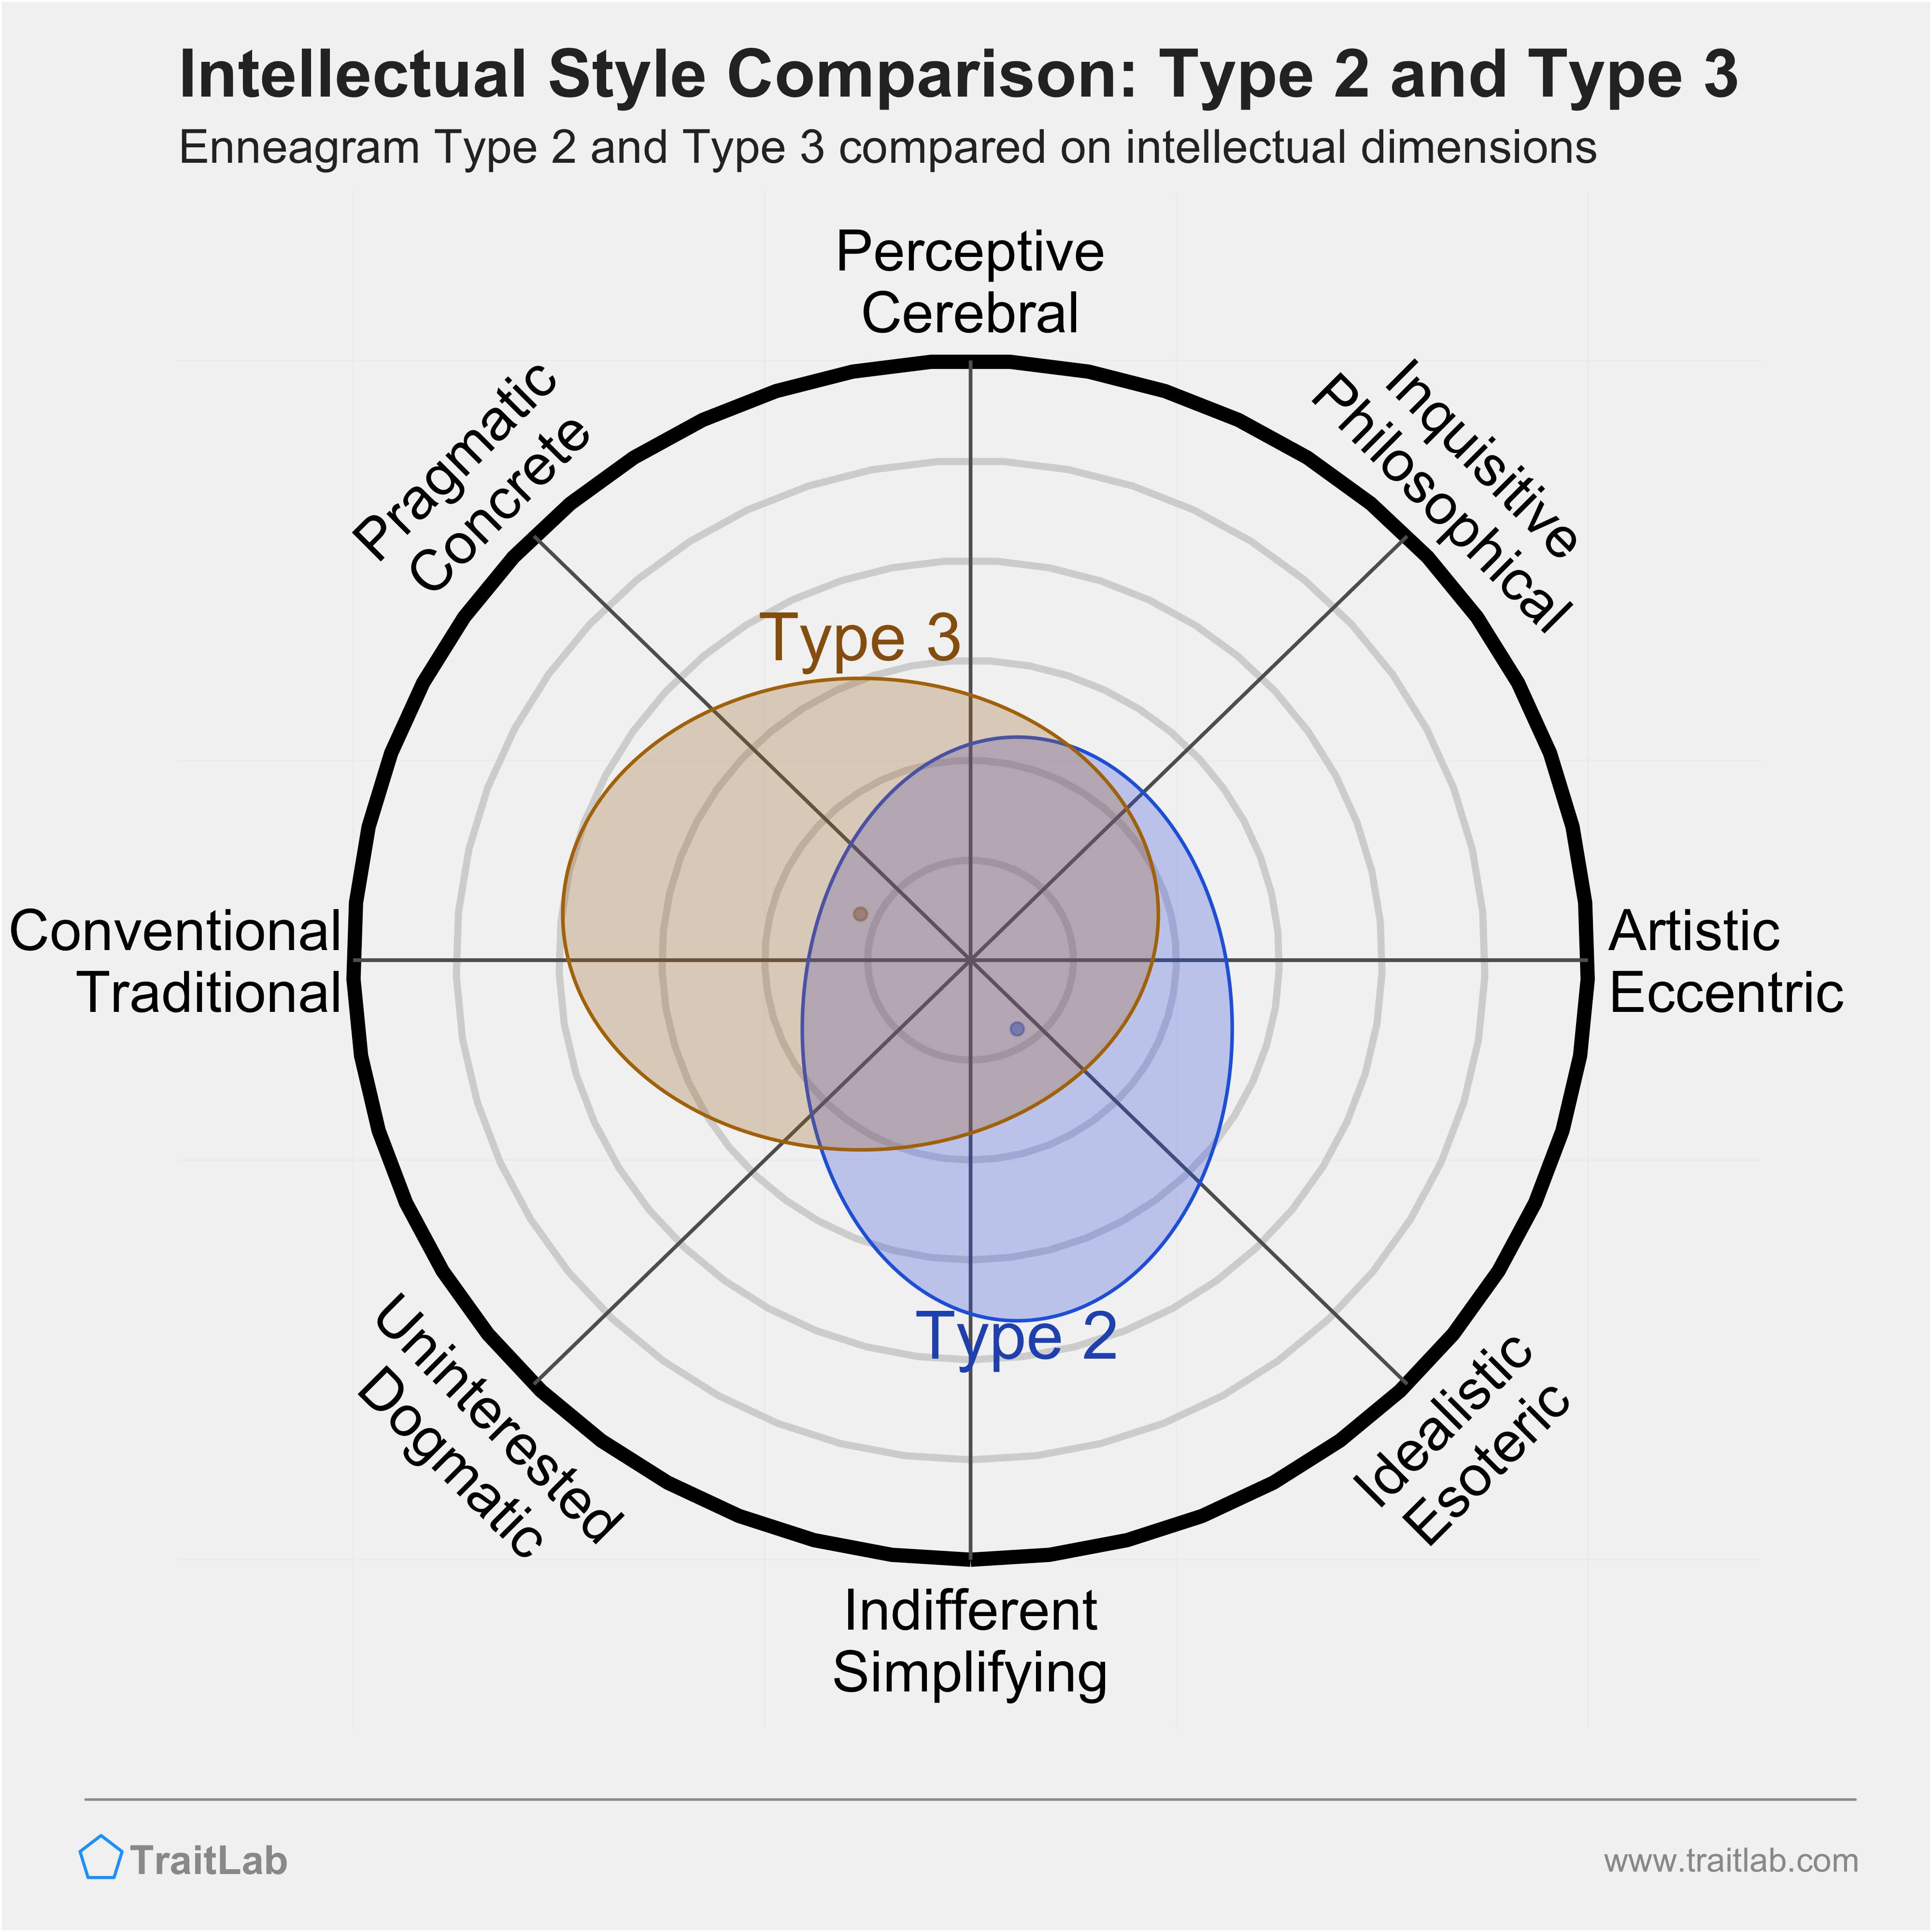 Type 2 and Type 3 comparison across intellectual dimensions